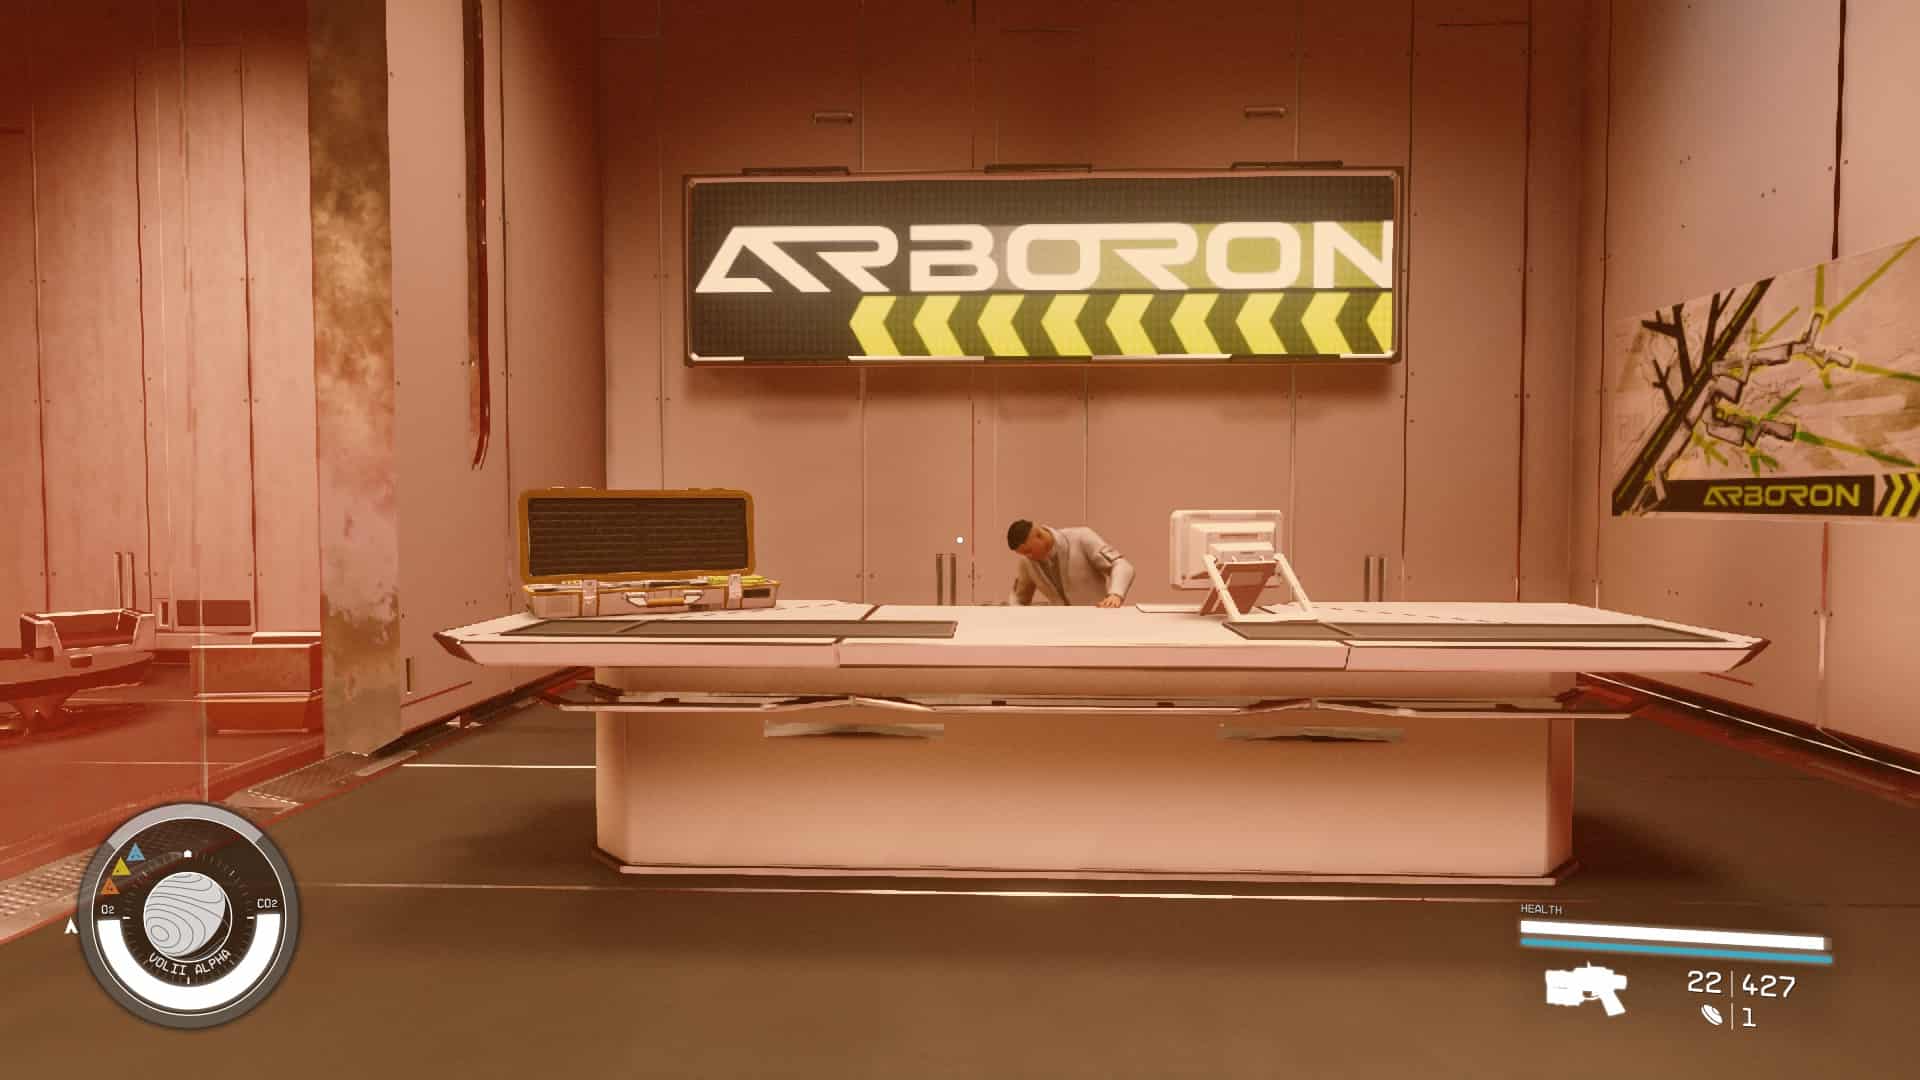 Starfield Neon shops: The counter at Arboron in the Ryujin Industries lobby.